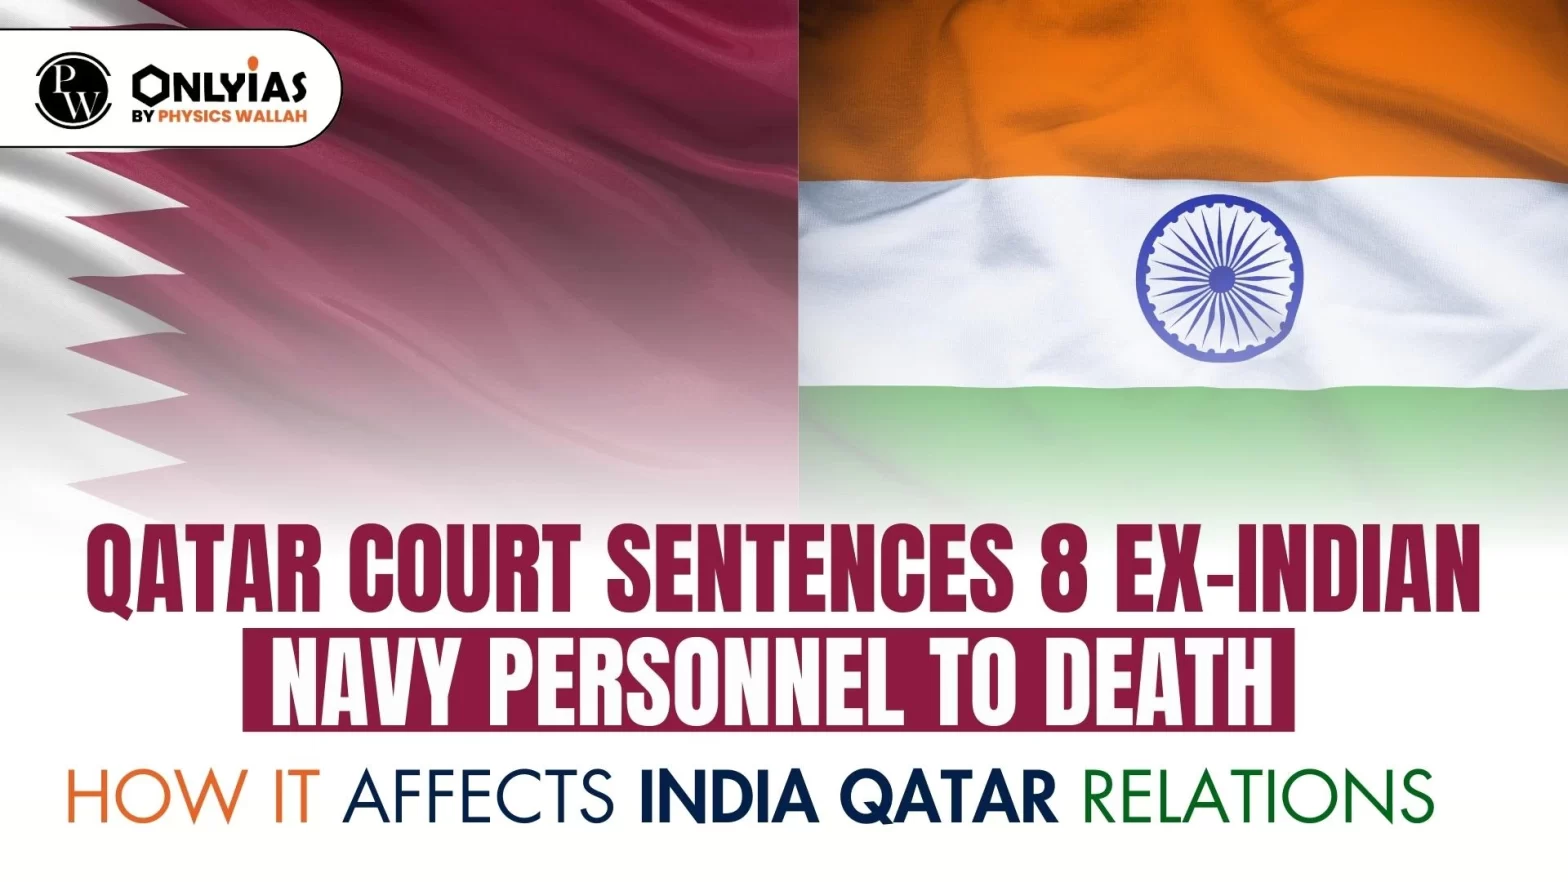 Qatar Court Sentences 8 Ex Indian Navy Personnel to Death: How It Affects India Qatar Relations